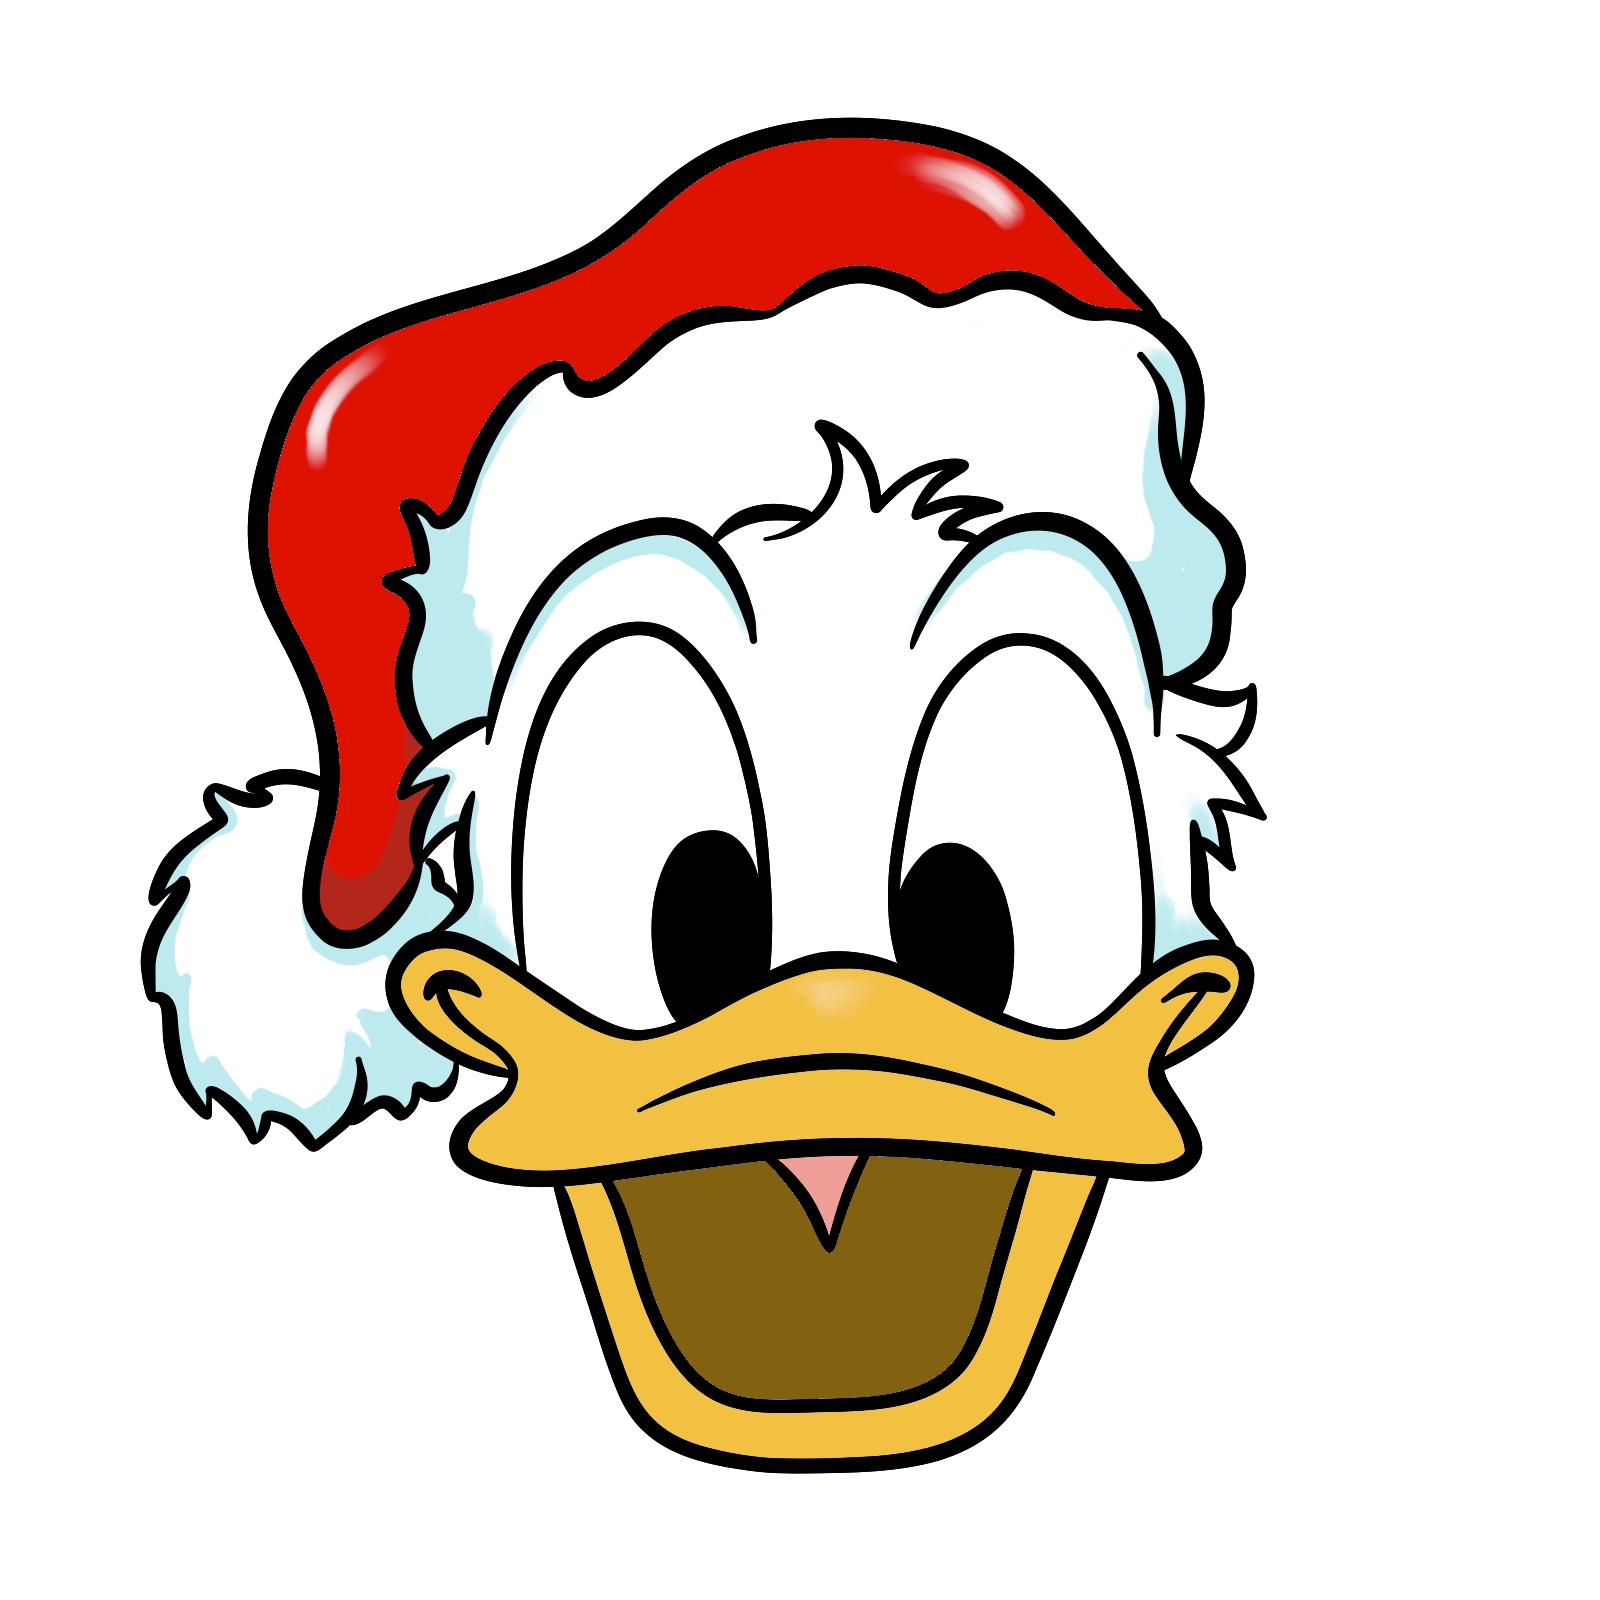 How to draw Christmas Donald Duck - final step